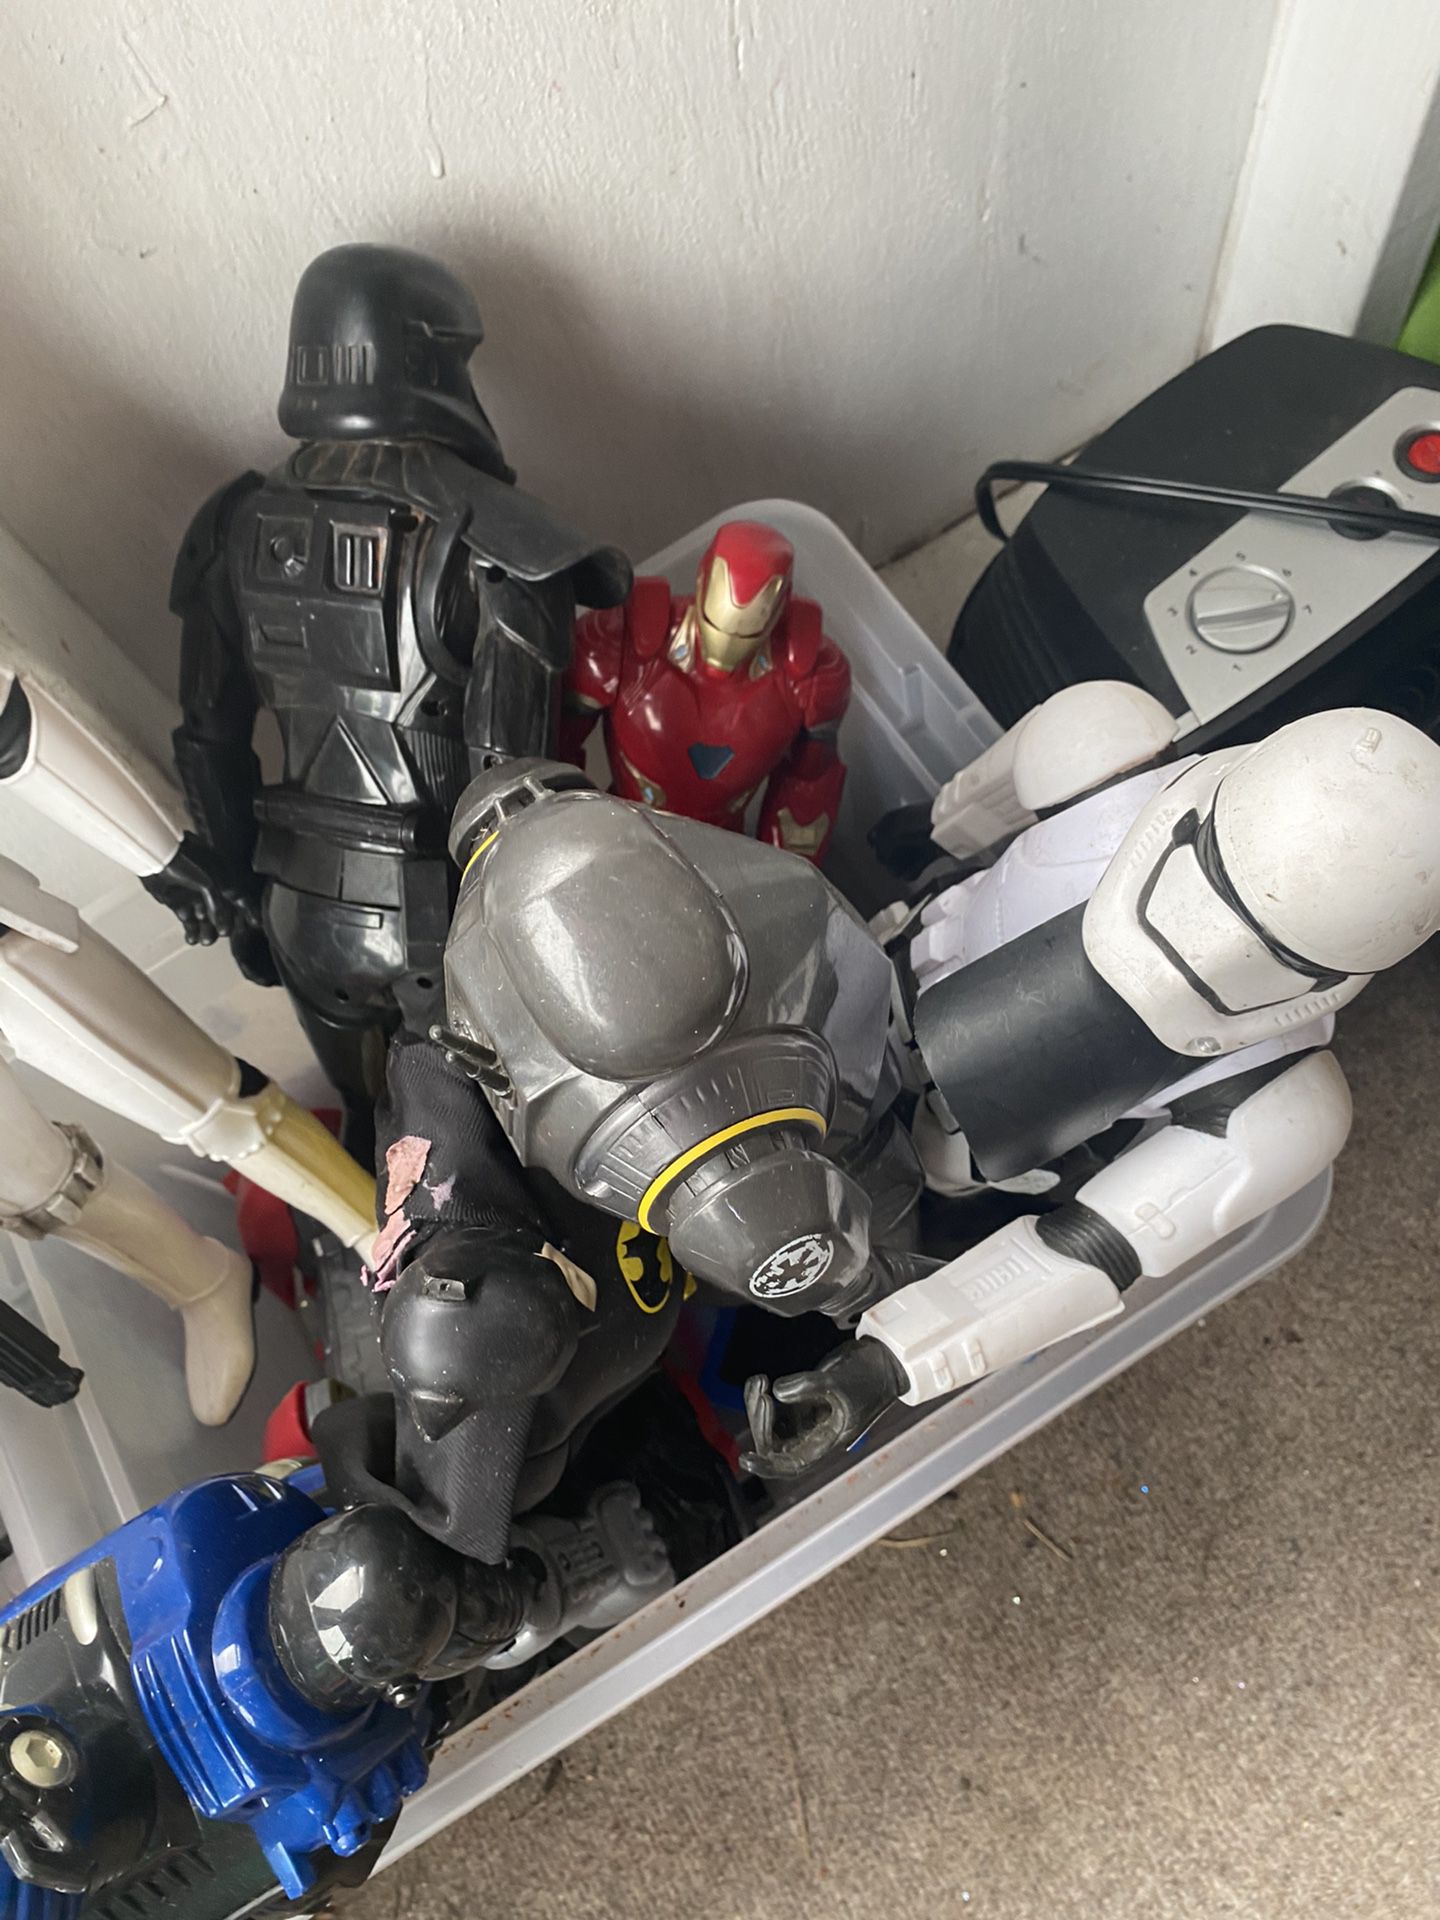 Gently used Toys Pick up